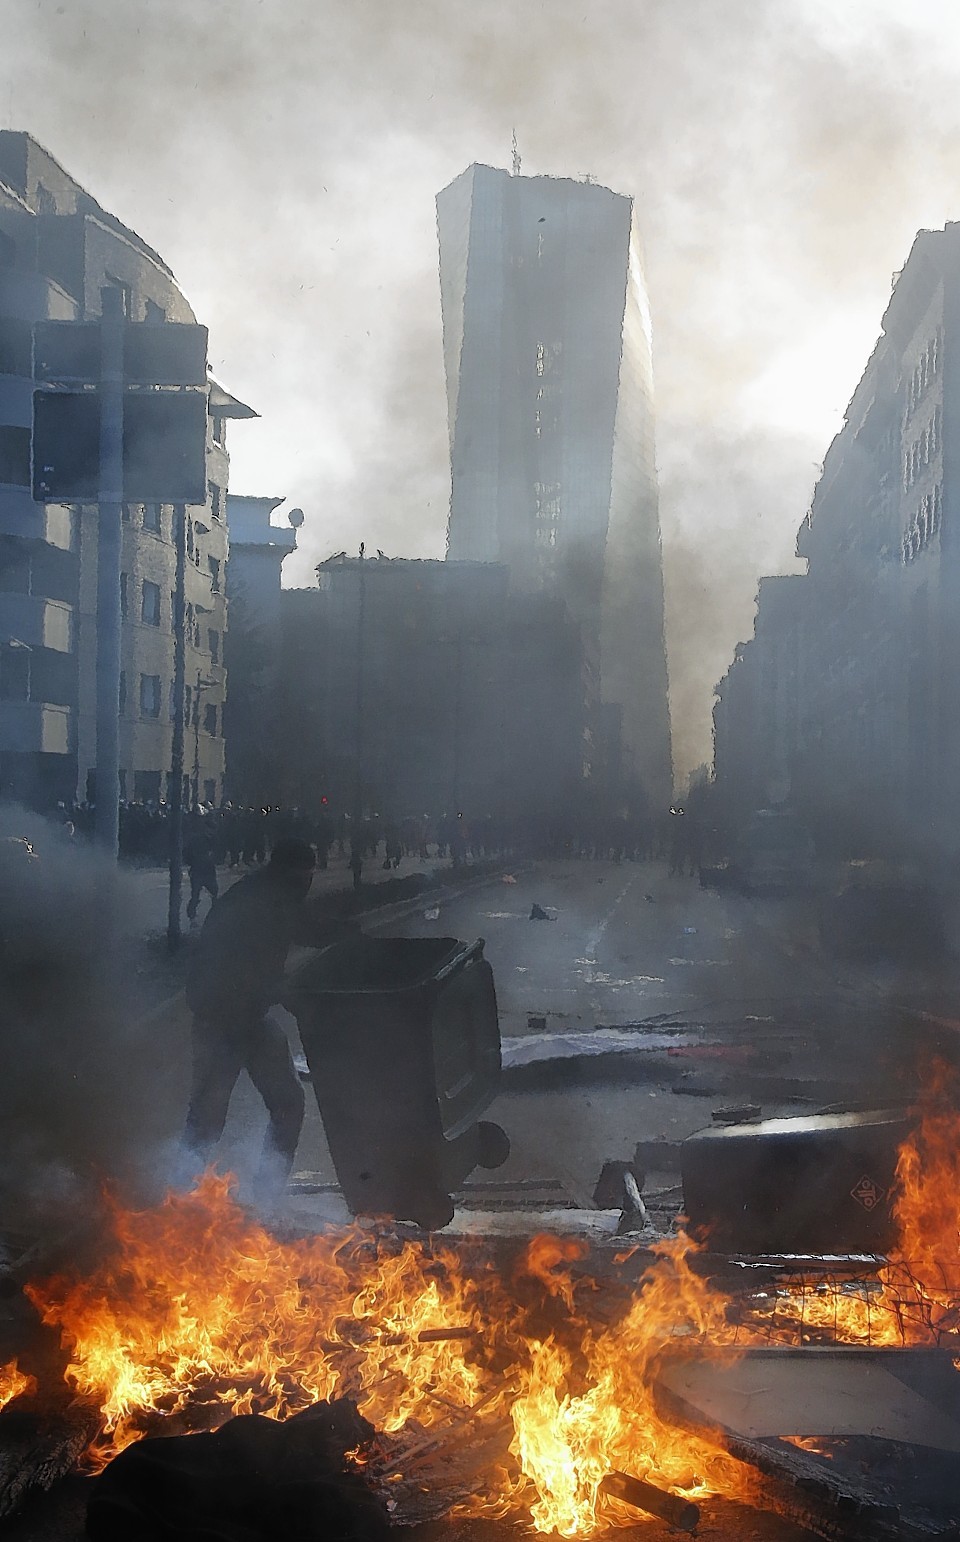 A protestor empties a trash bin as smoke billows over burning barricades in front of the new headquarters 